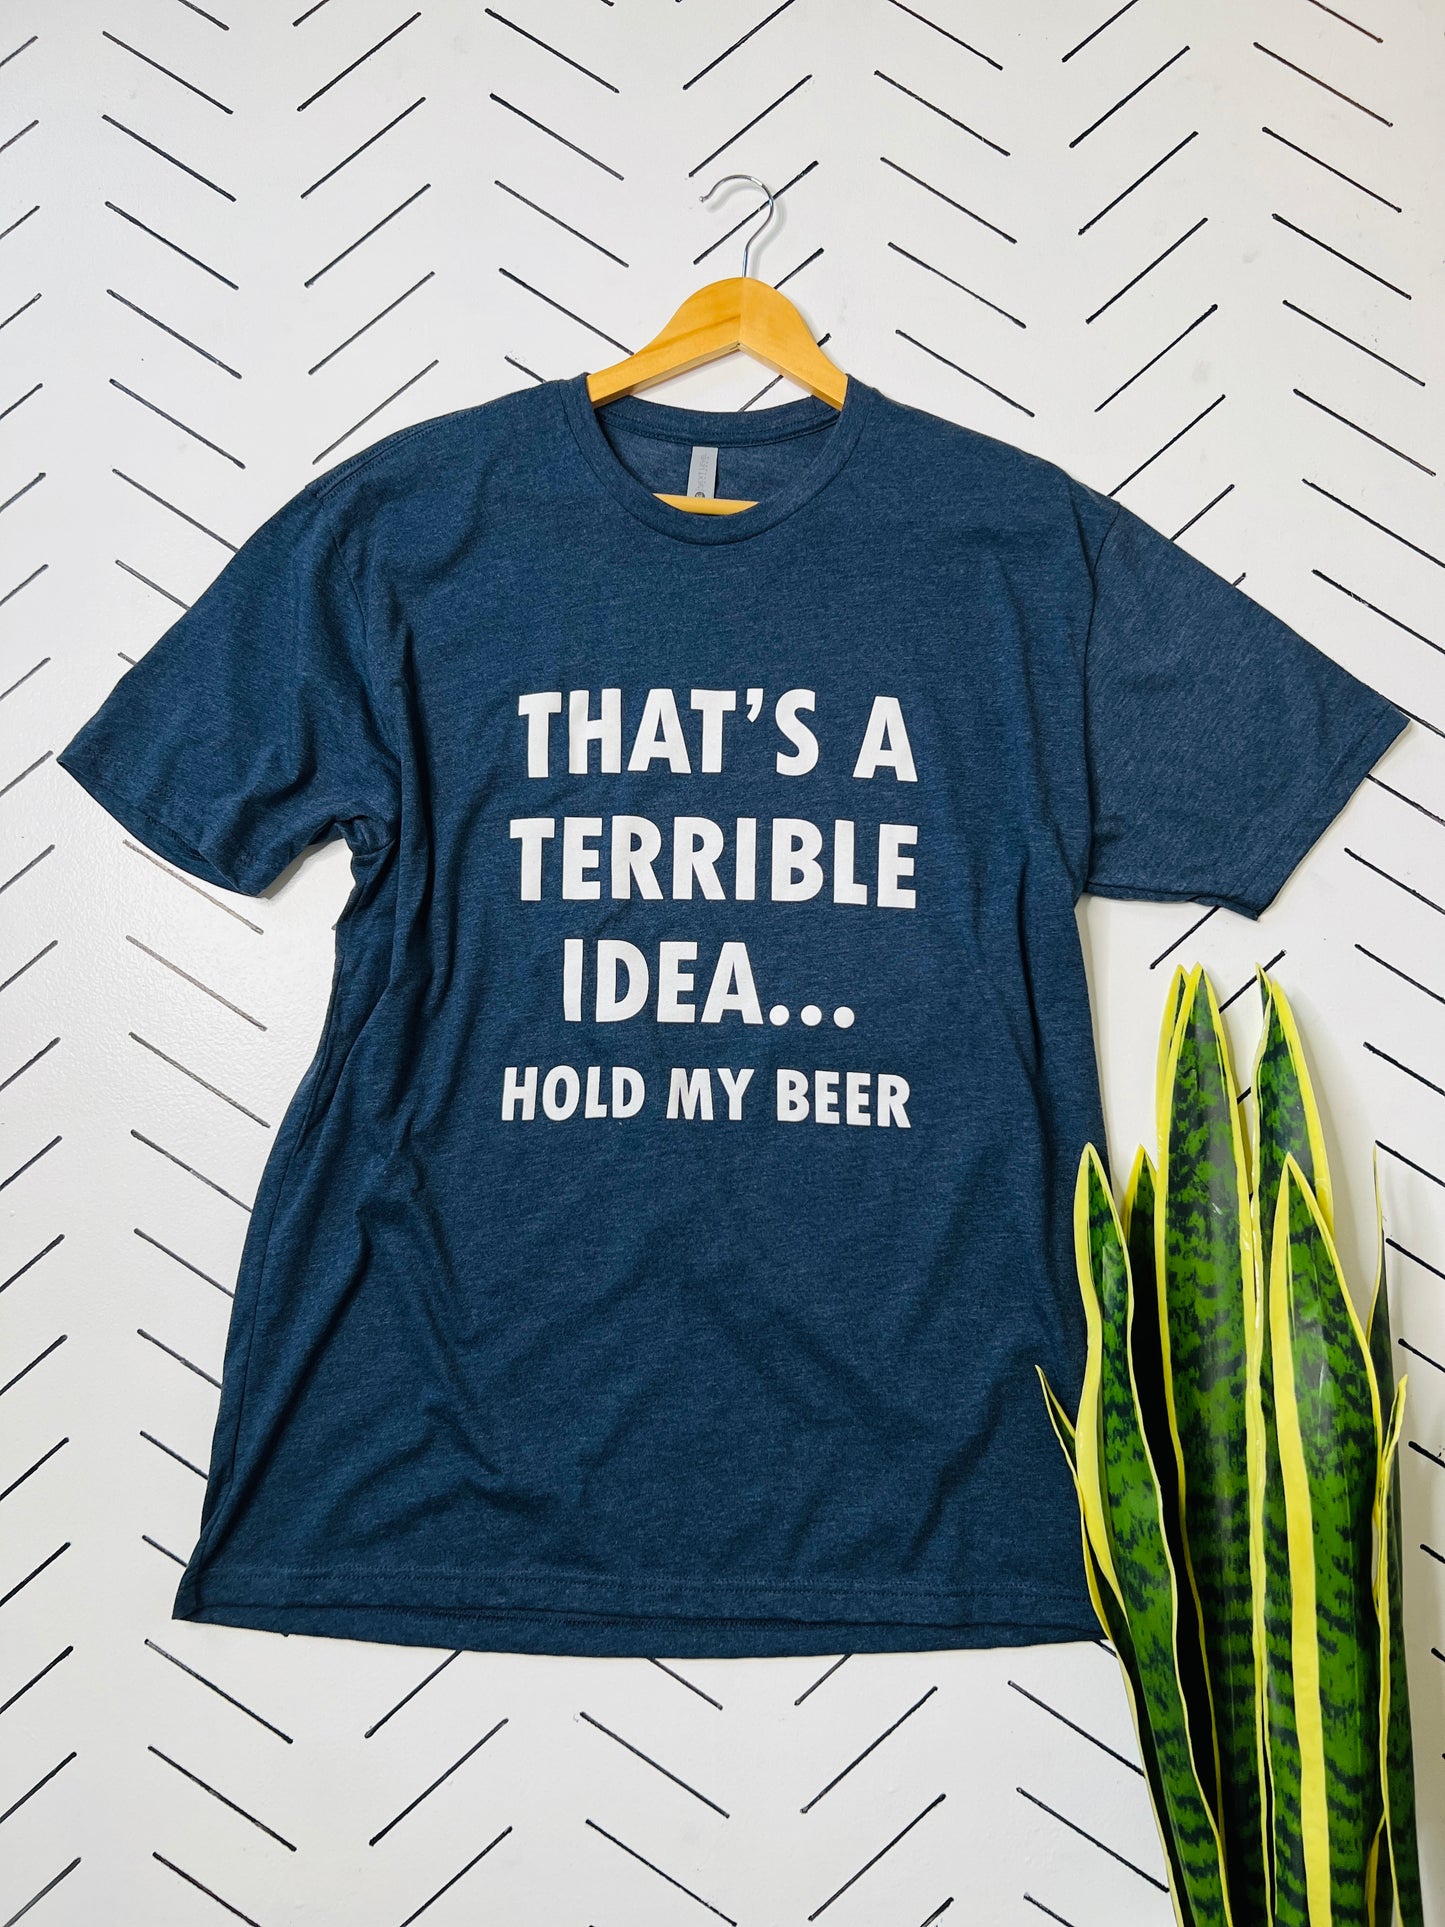 NWT "That's a Terrible Idea..." Graphic Tee